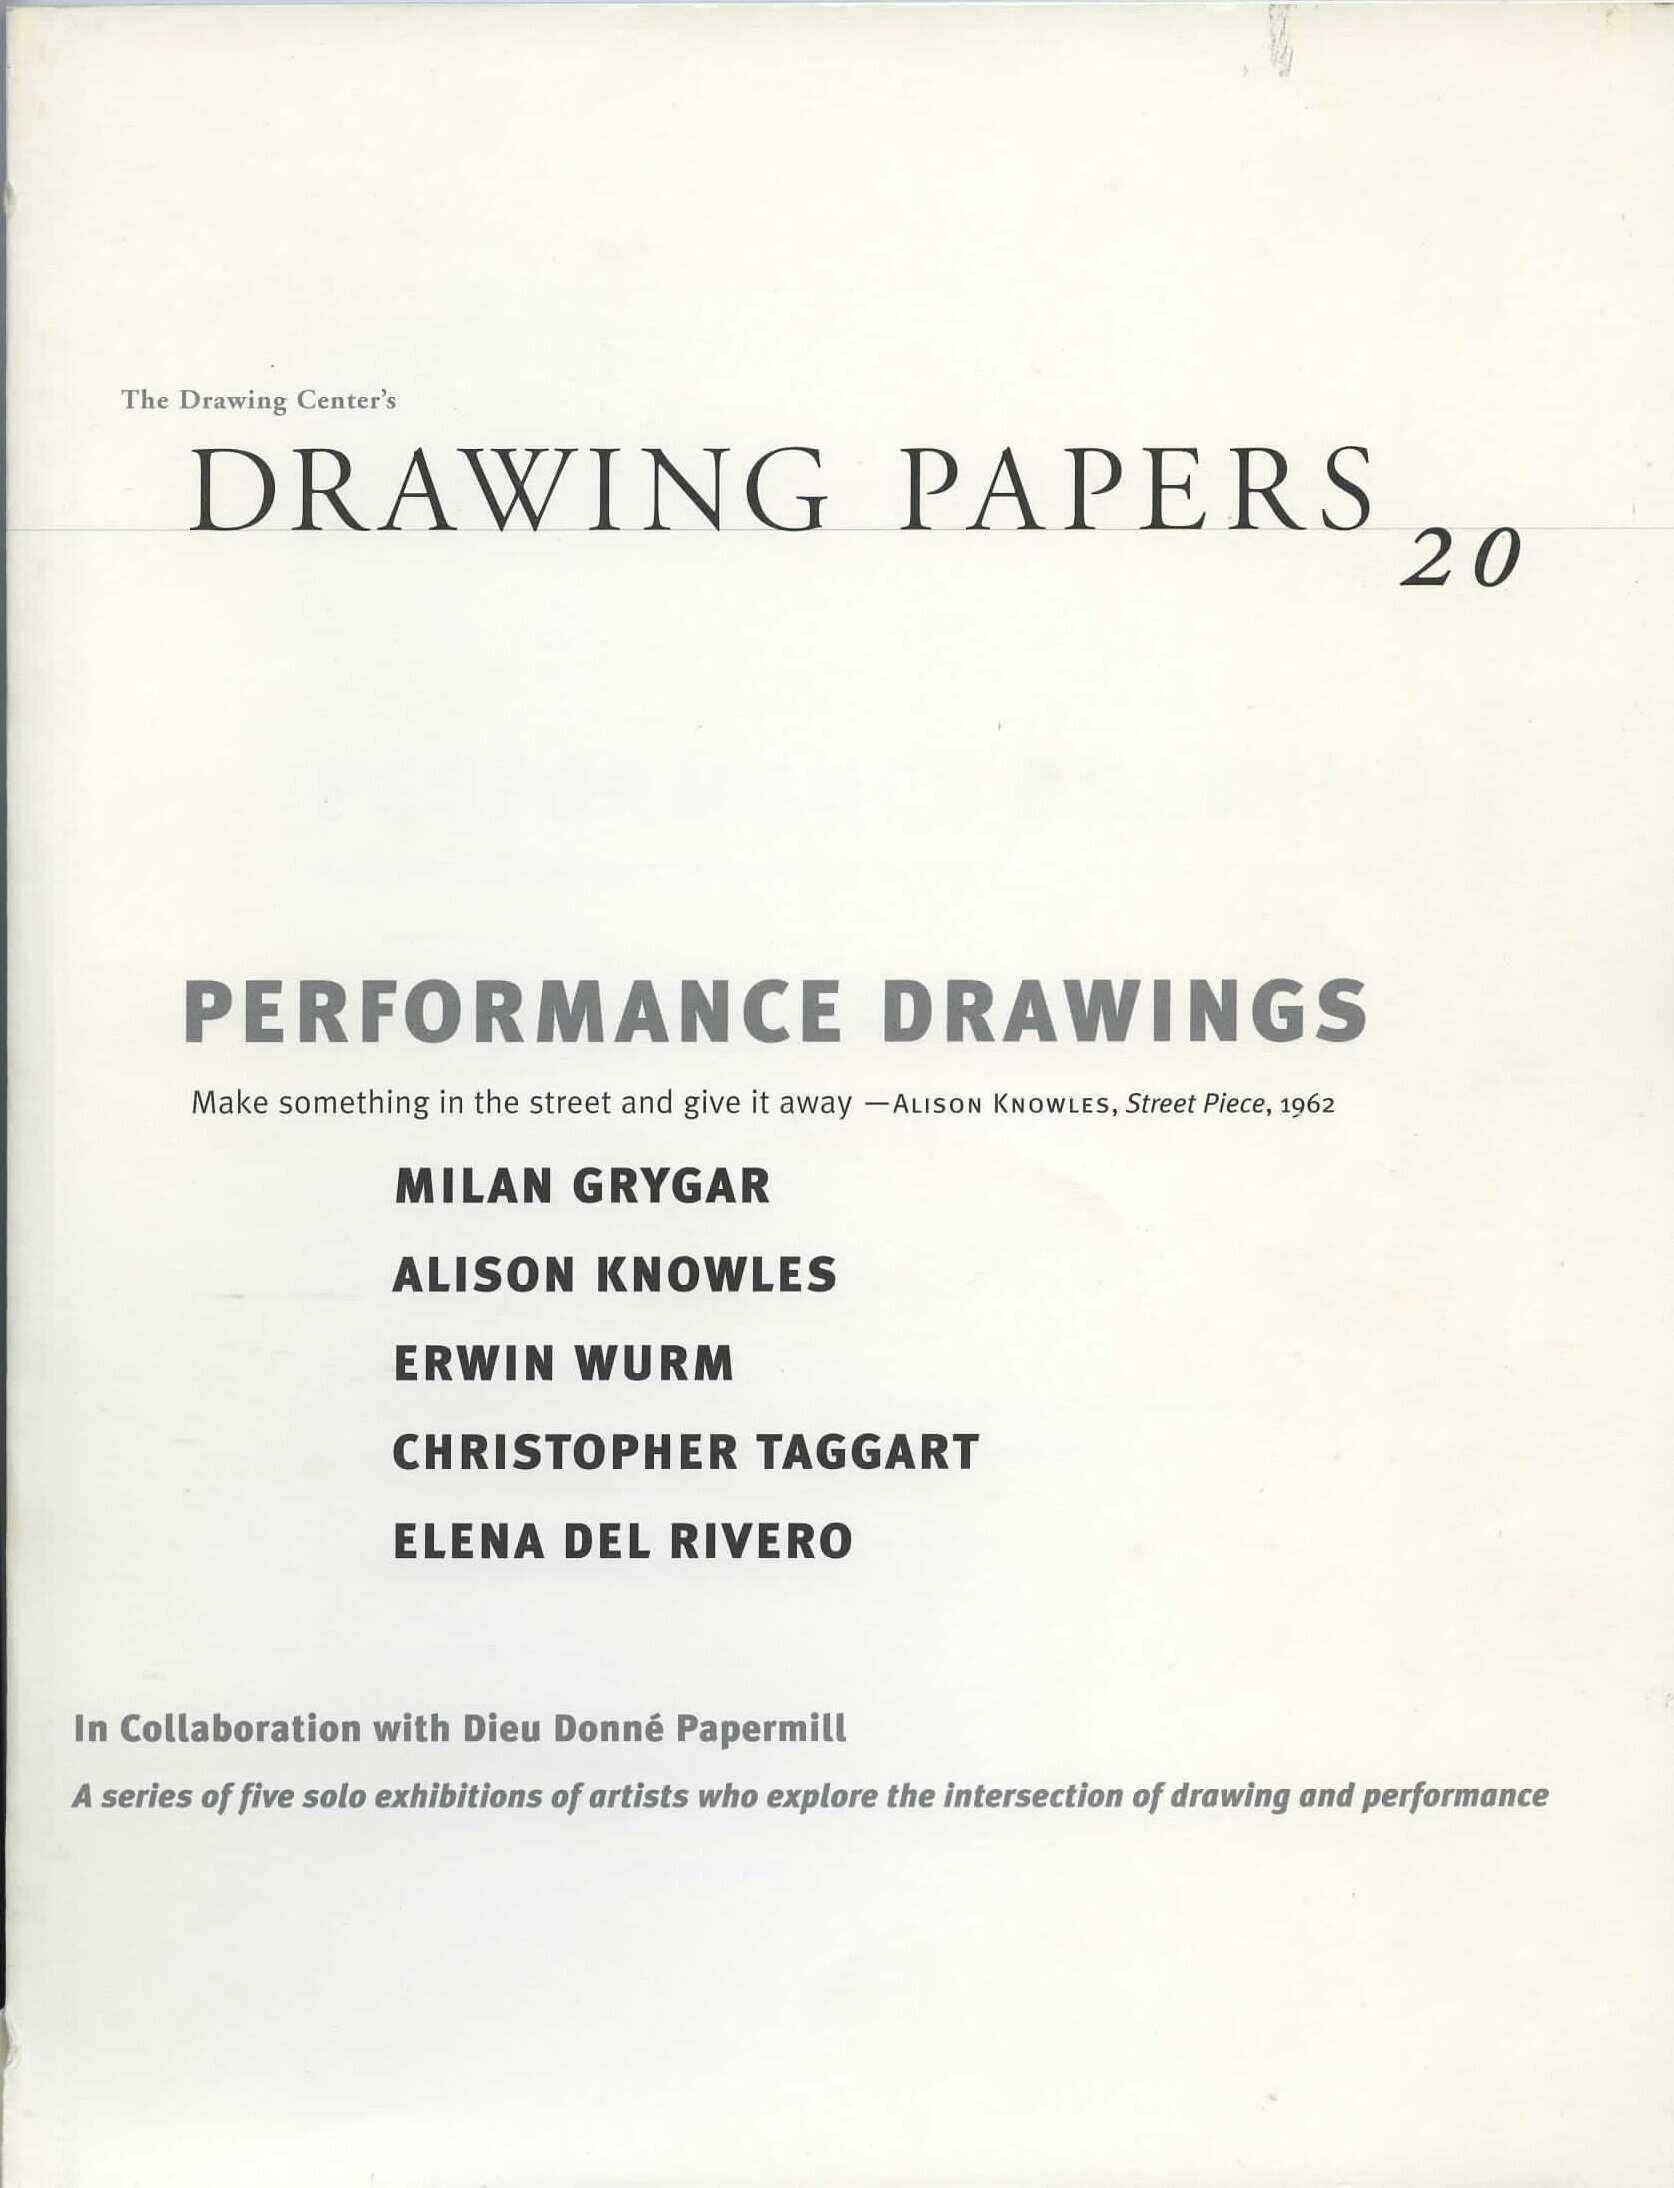  “Performance Papers” curated by Catherine de Zegher exhibition catalogue published by the Drawing Center in New York,  2001 with an essay by Elizabeth Finch 